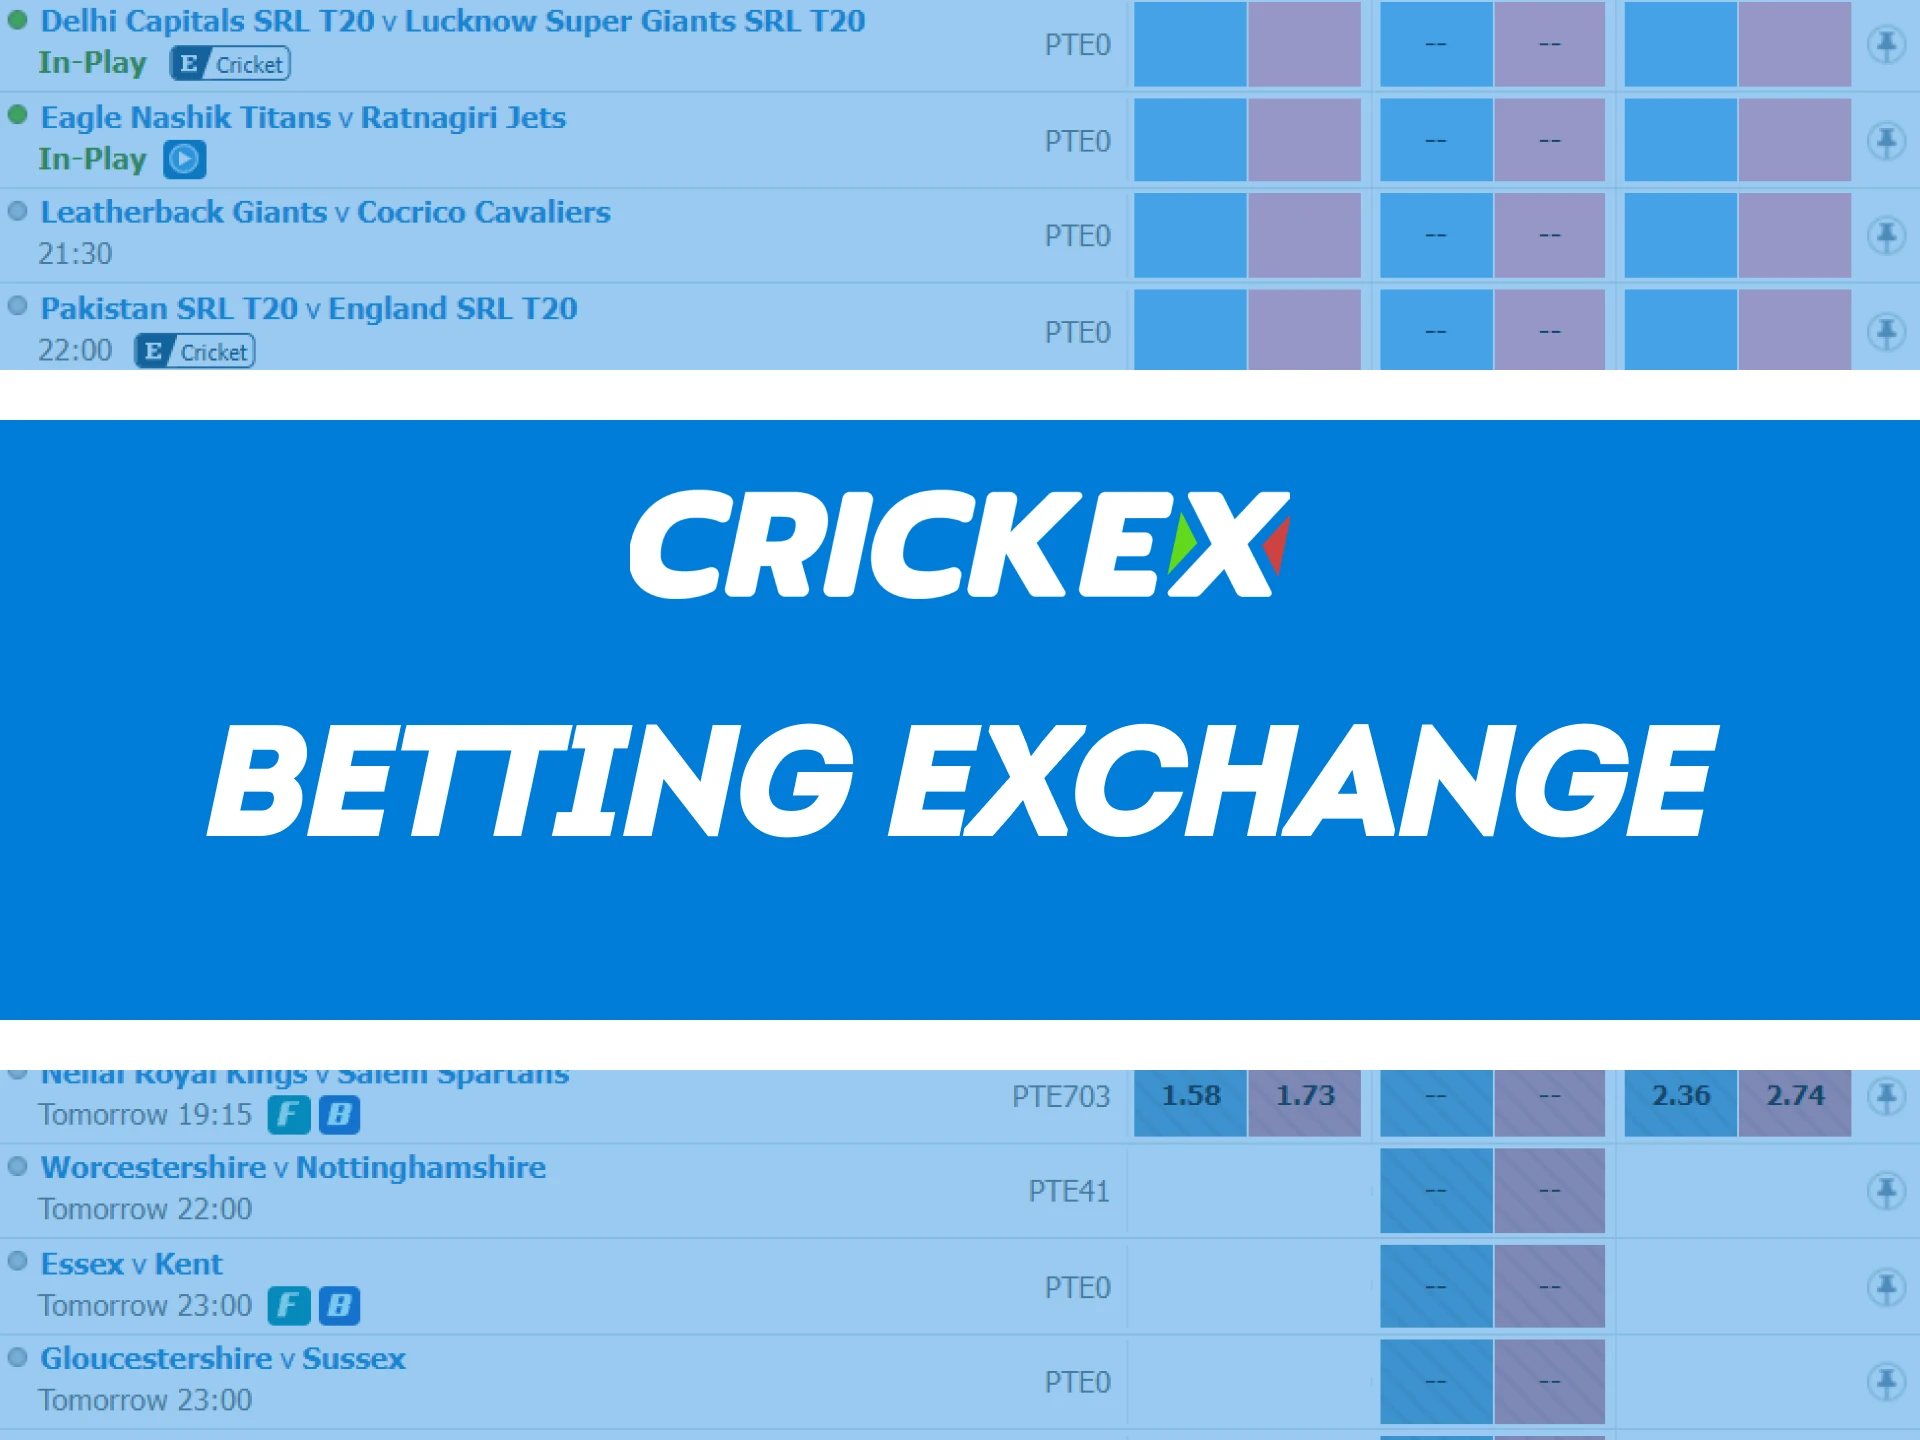 Choose what you want to bet on Crickex.